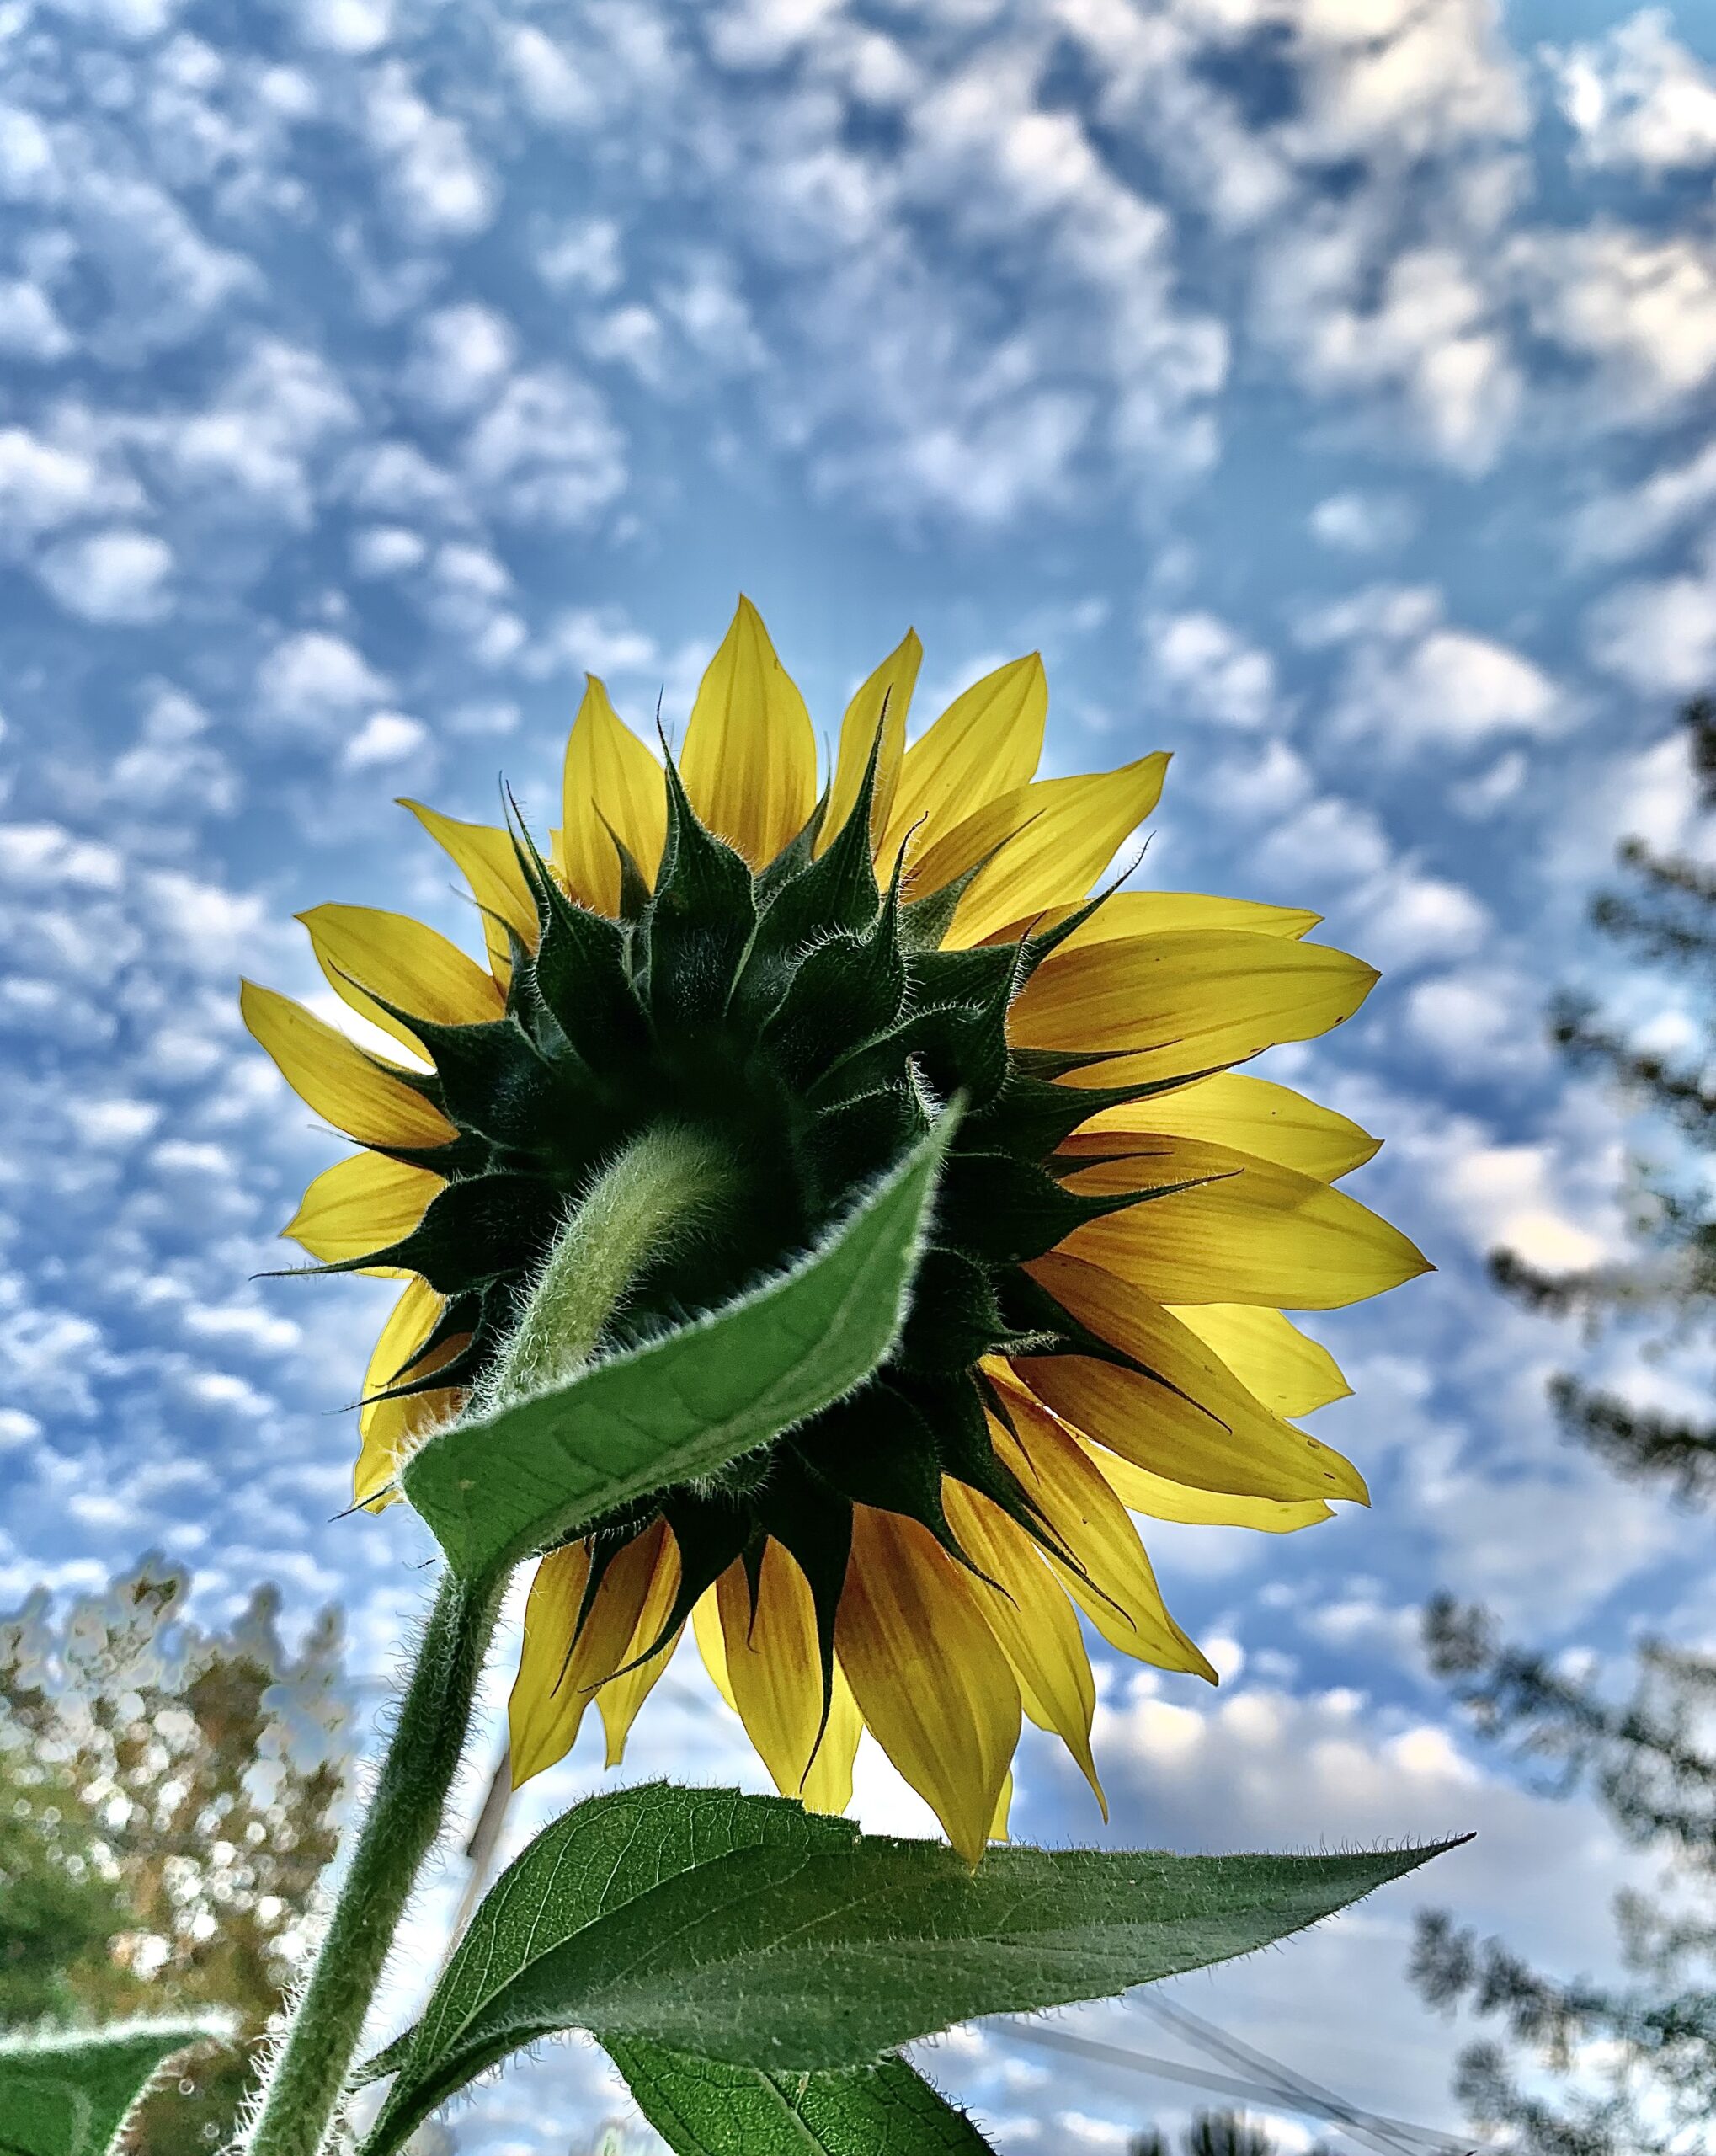 A yellow sunflower with a blue sky behind it.